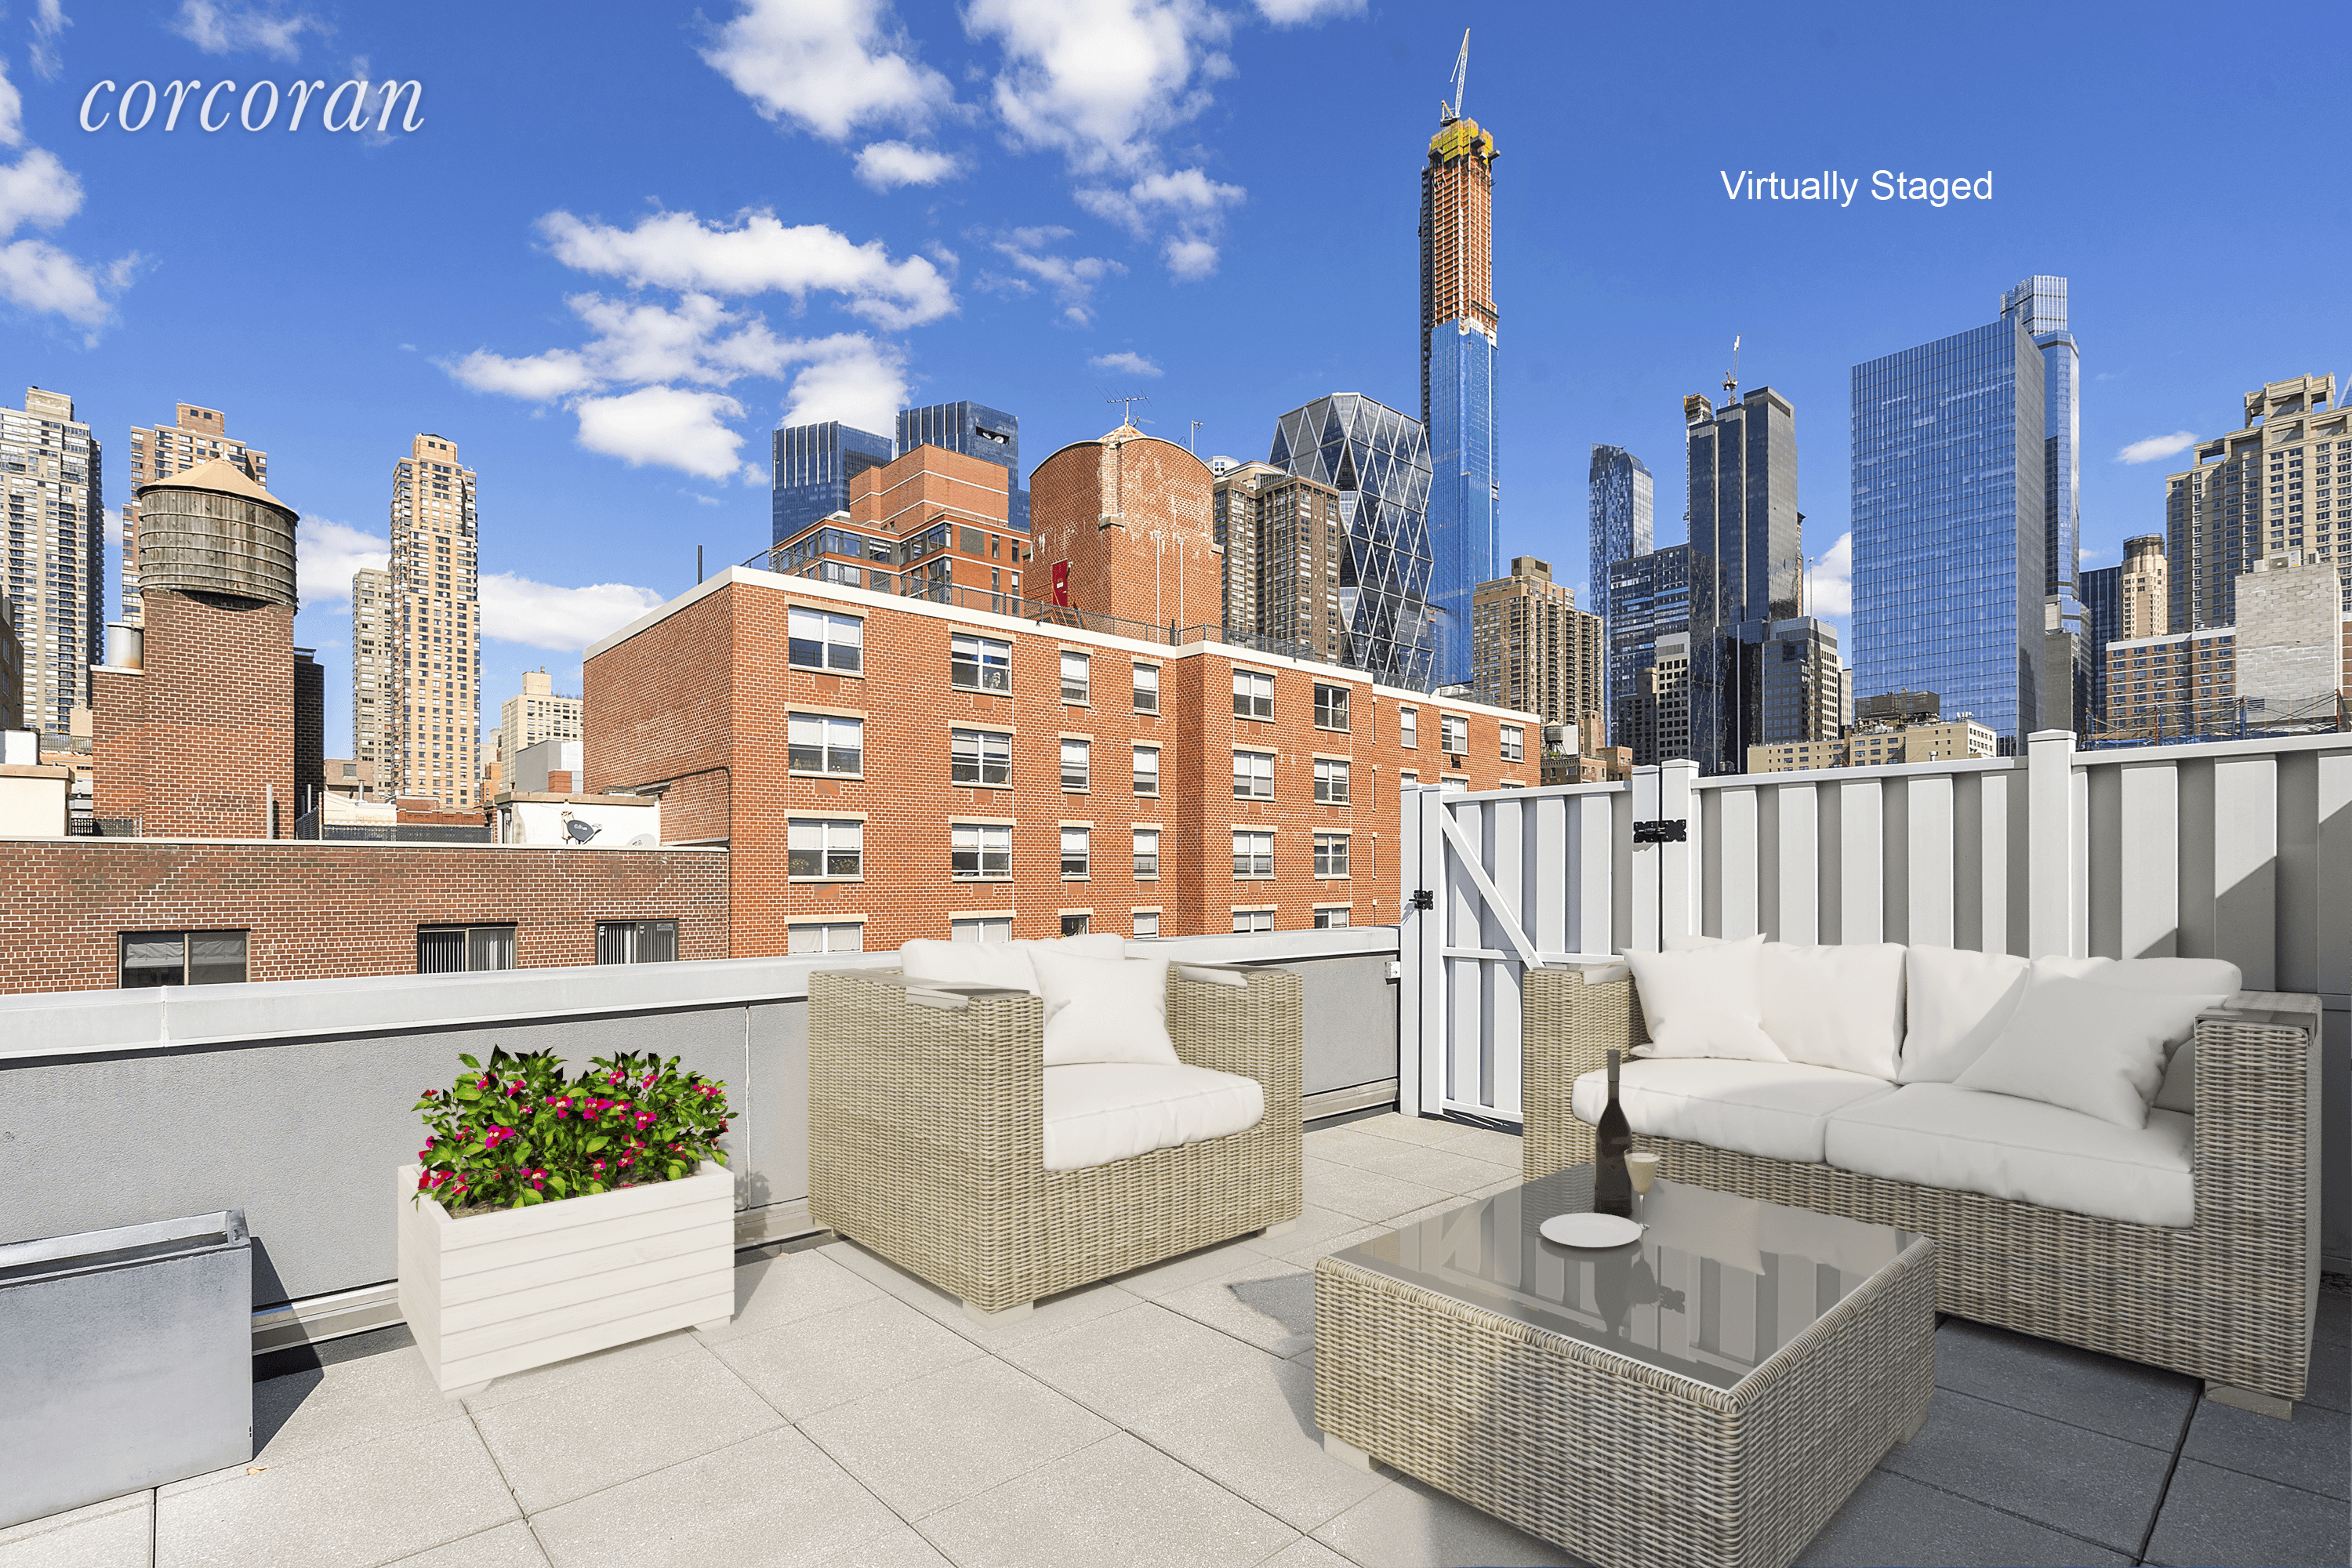 425 West 53rd Street Penthouse 2 is a unique and luxurious 2, 138 SF 4 bedroom 3 bathroom triplex condo with 430 square feet of private rooftop terrace.